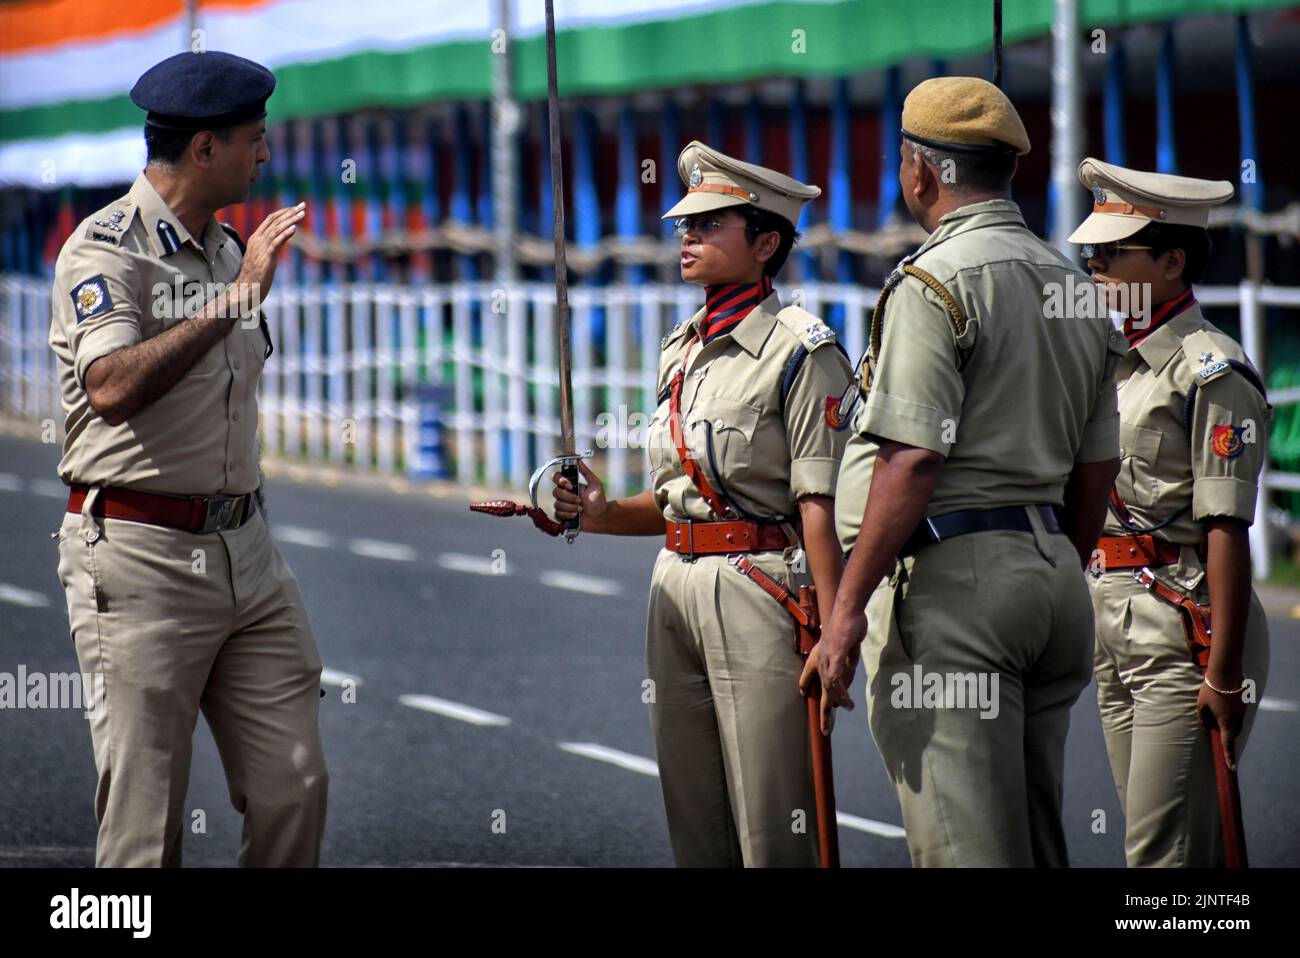 Police personel of different department seen practicing during the Independence day Final Dress Rehearsal. India prepares to celebrate the 75th Independence day on 15th August 2022 as part of the Azadi Ka Amrit Mahotsav celebration. Stock Photo